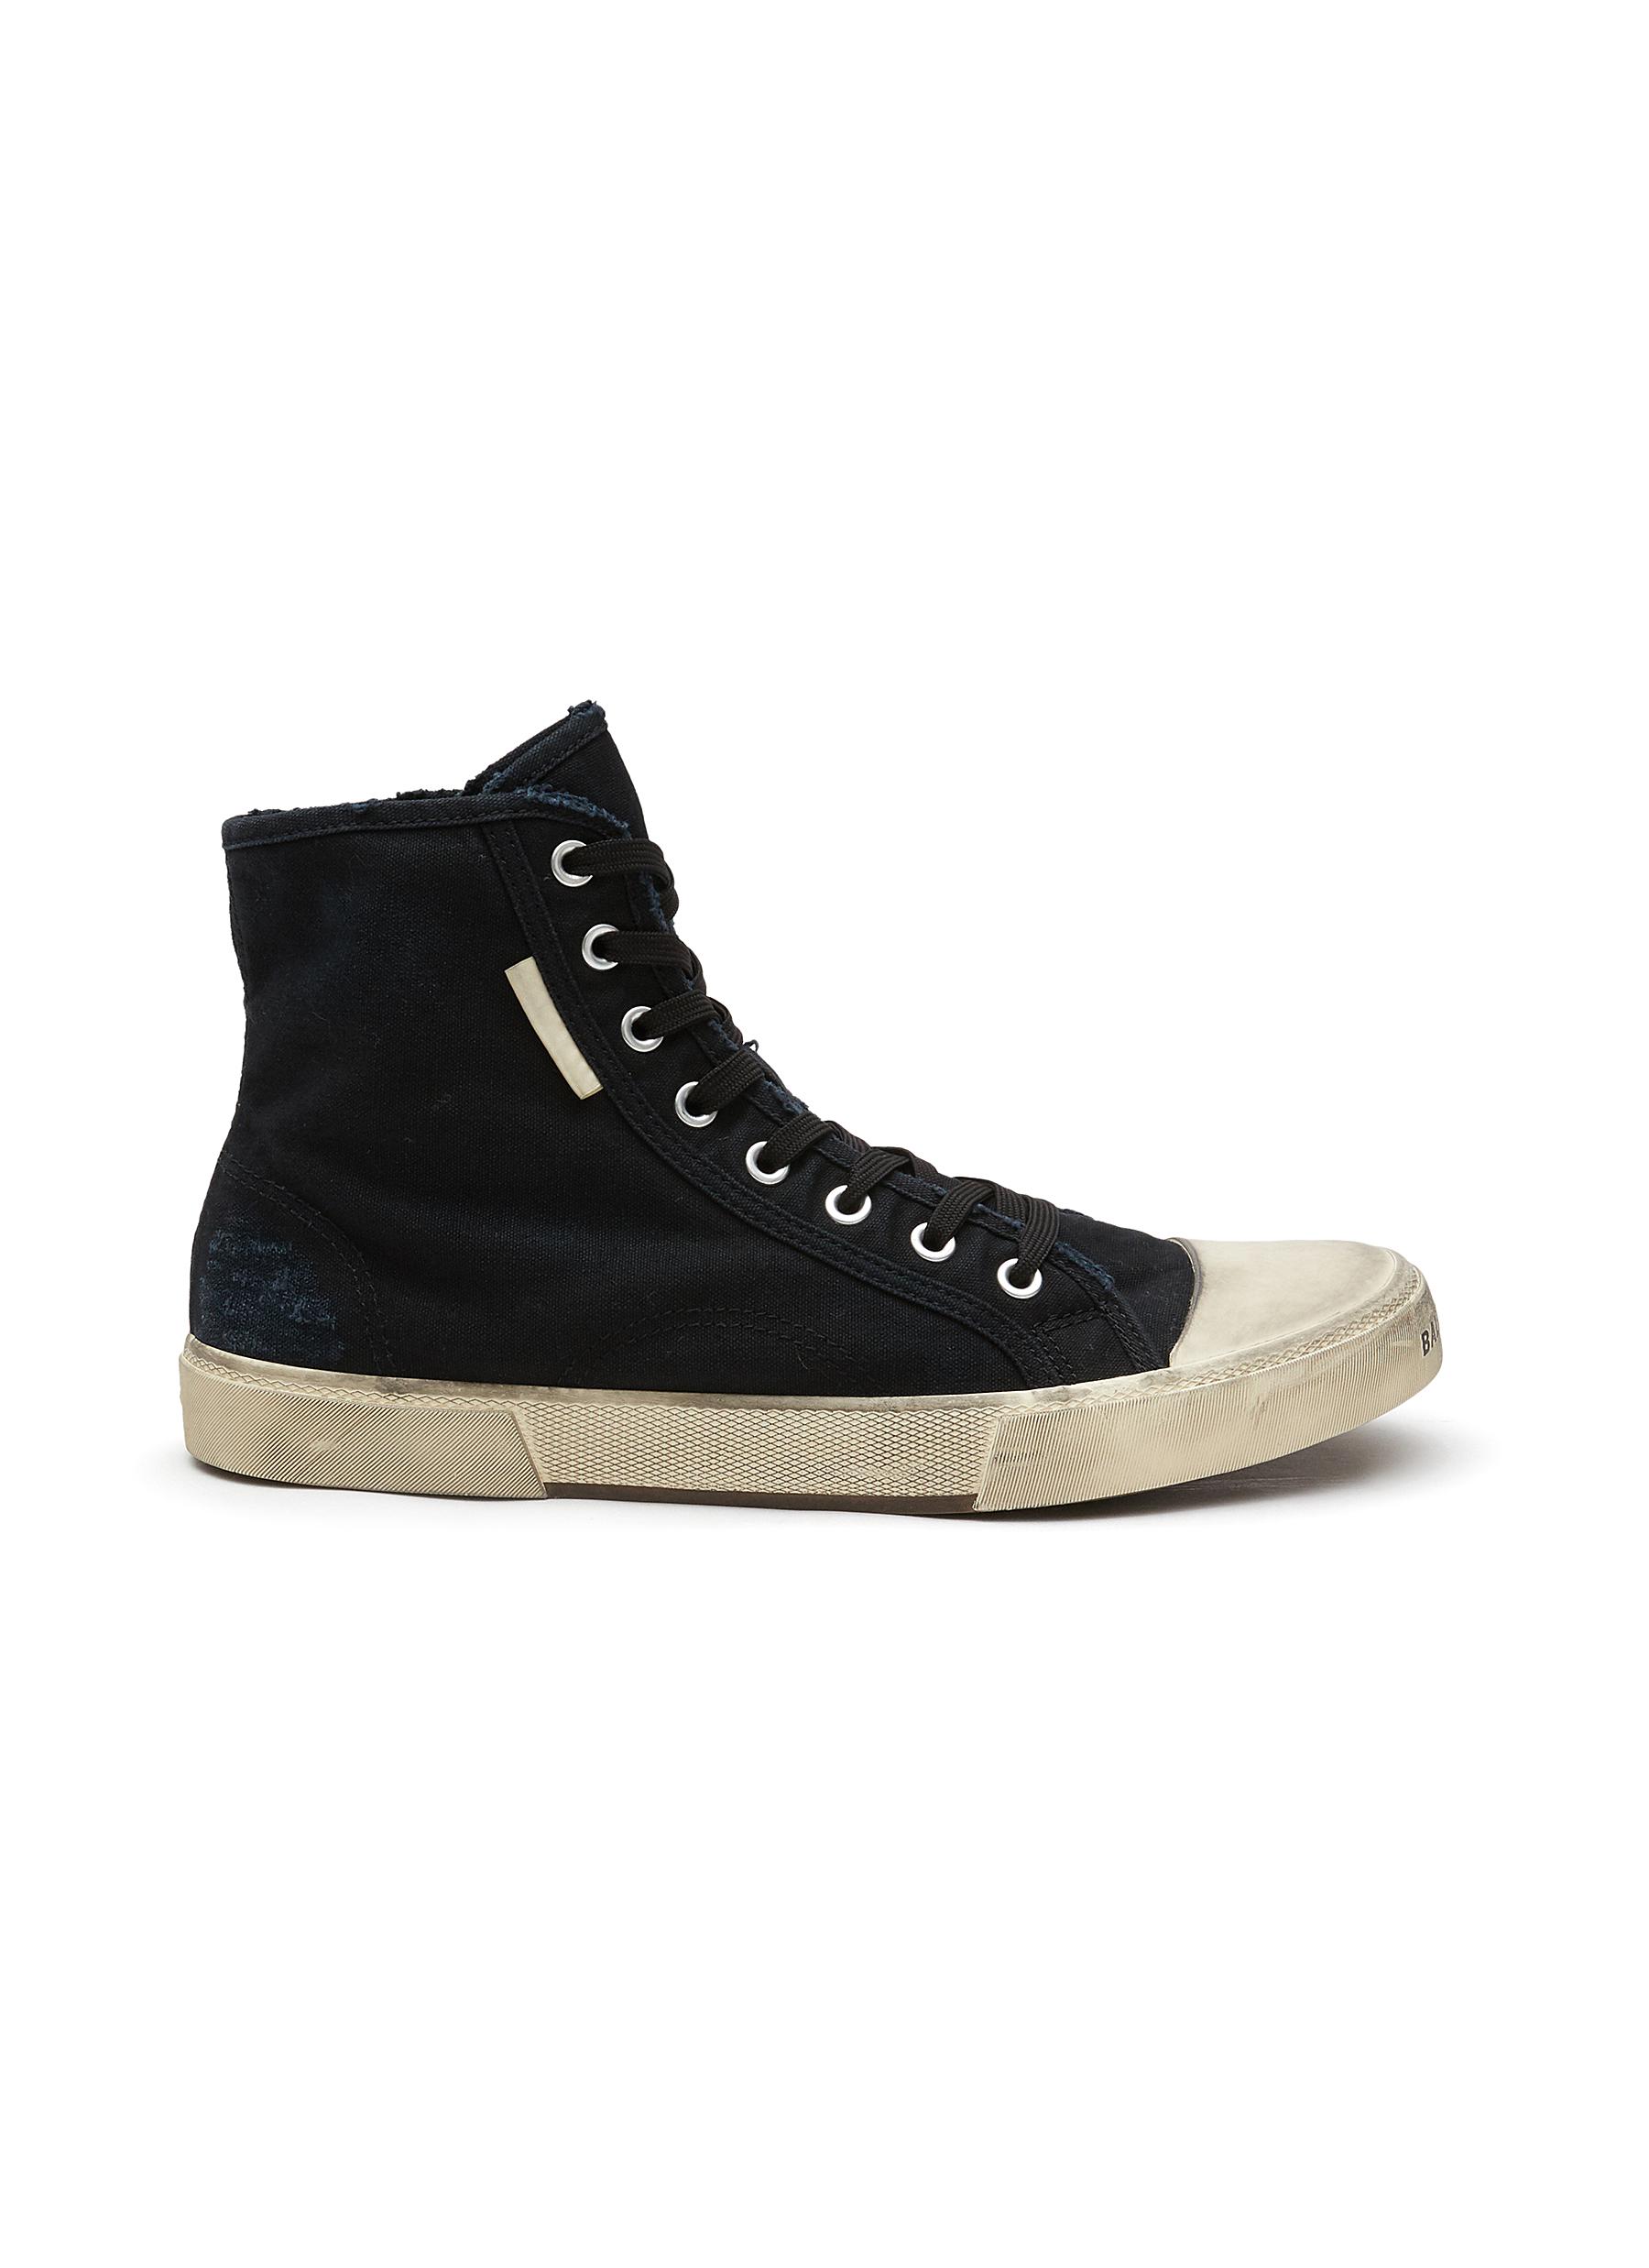 'PARIS' HIGH TOP LACE UP SNEAKERS